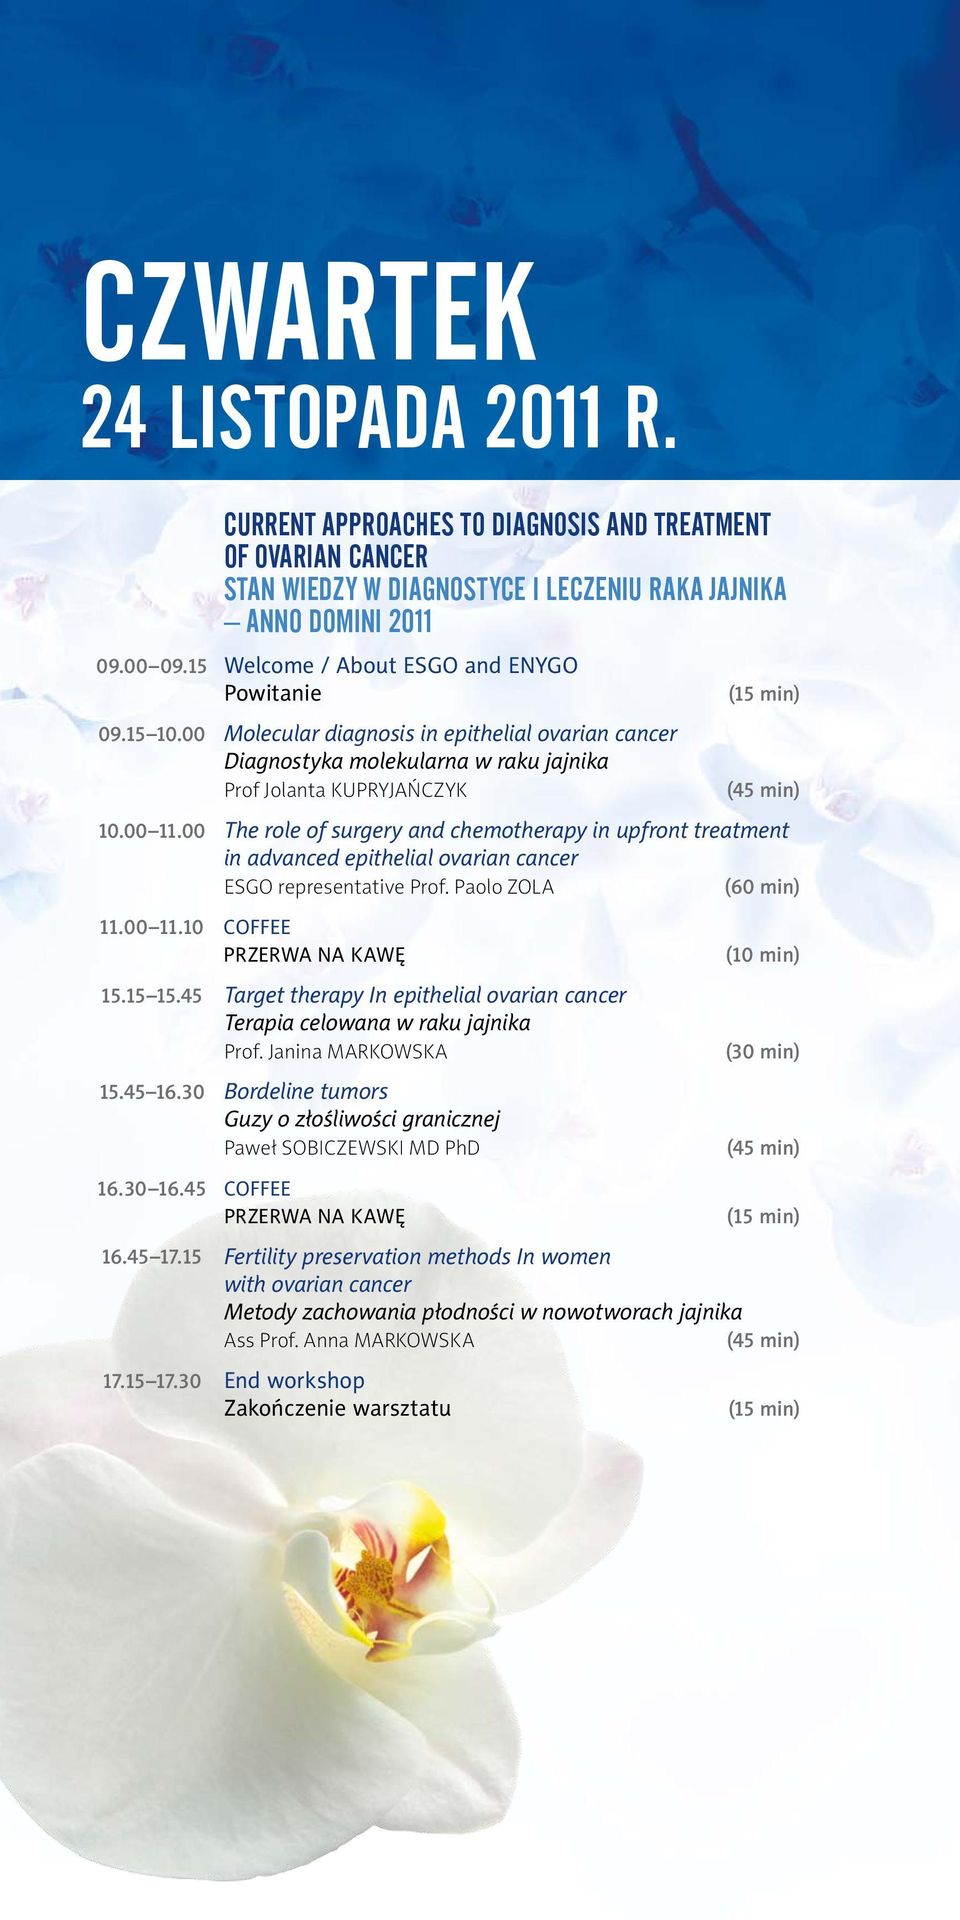 00 The role of surgery and chemotherapy in upfront treatment in advanced epithelial ovarian cancer ESGO representative Prof. Paolo Zola (60 min) 11.00 11.10 Coffee Przerwa na kawę 15.15 15.